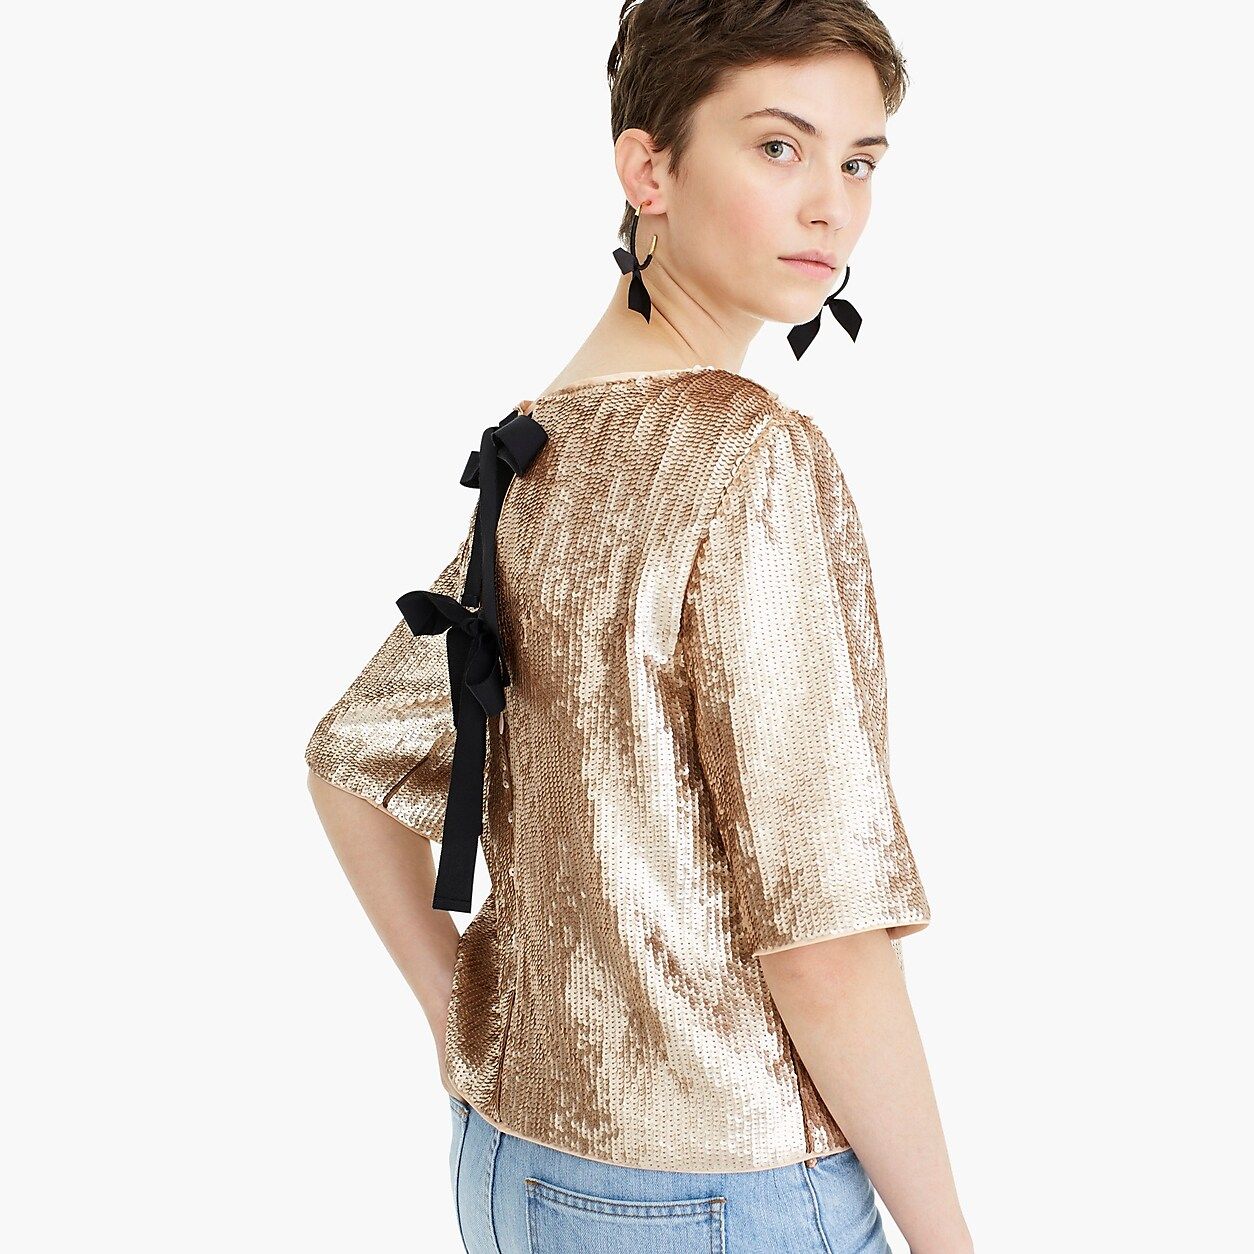 Cropped sequin top in rose gold | J.Crew US